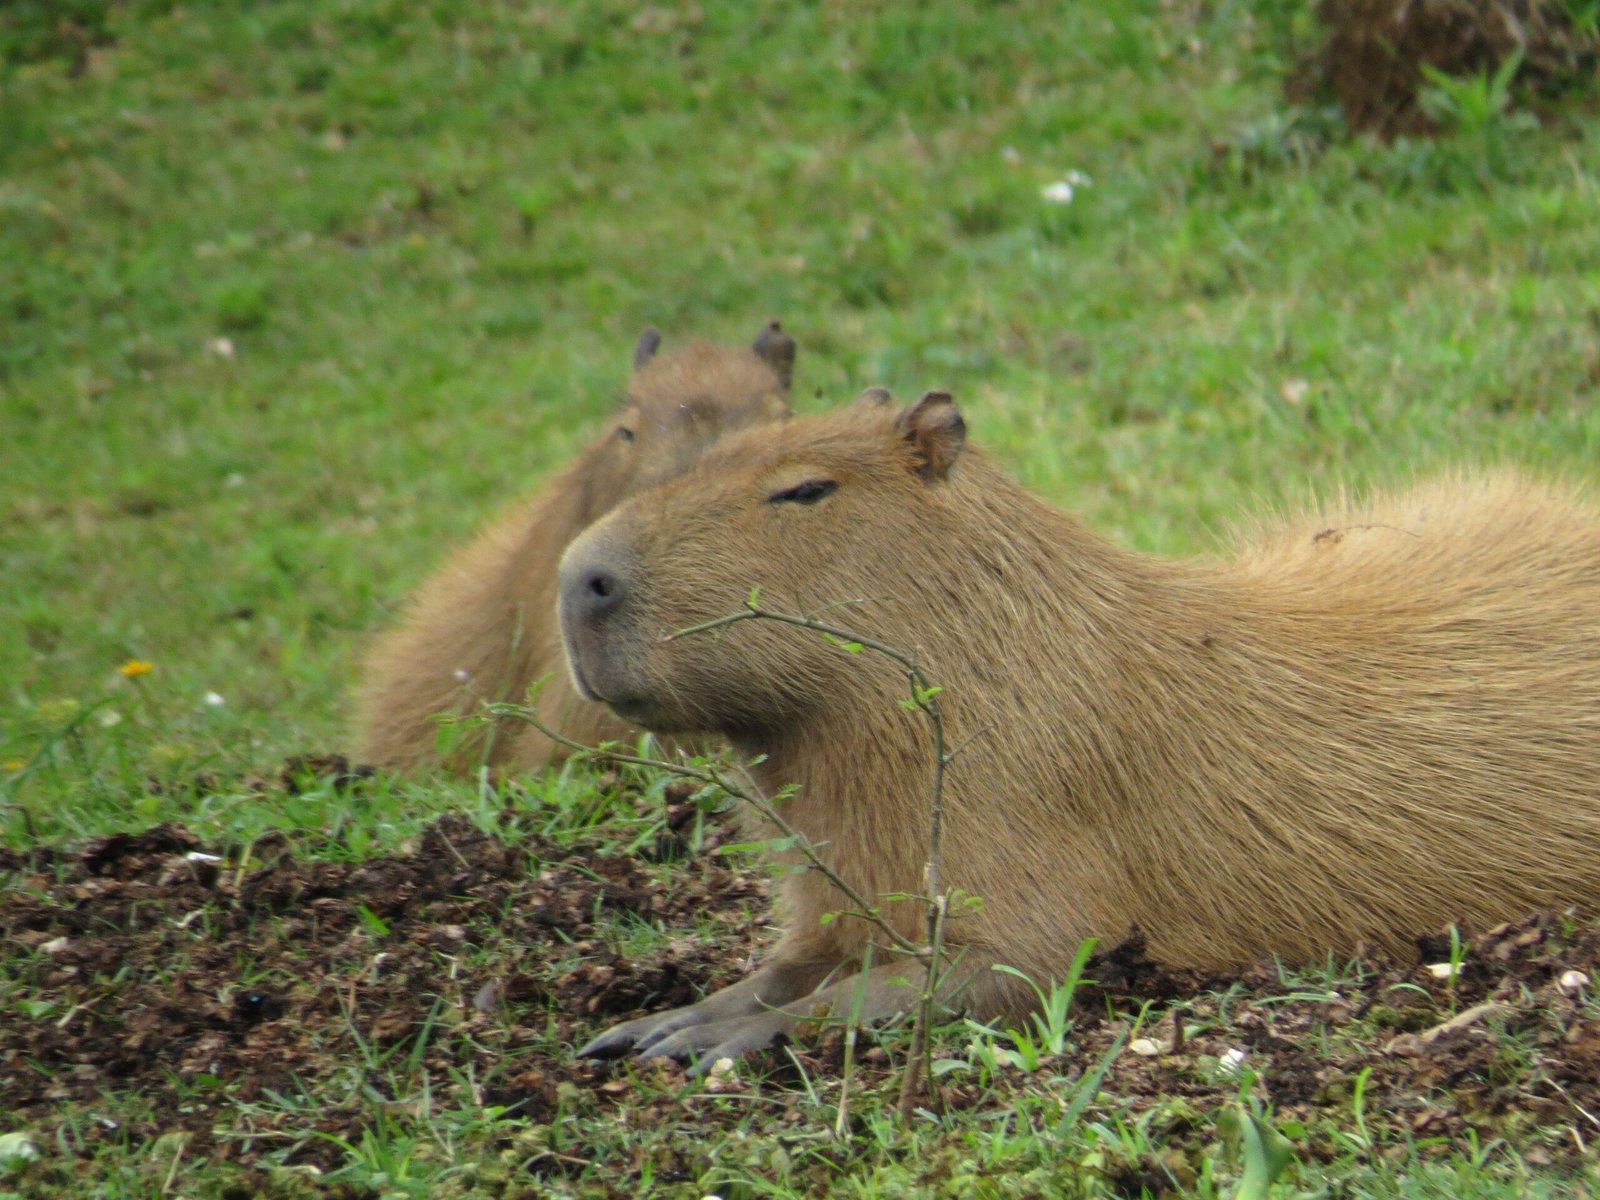 Giant Guinea Pig: Another Name for Capybara